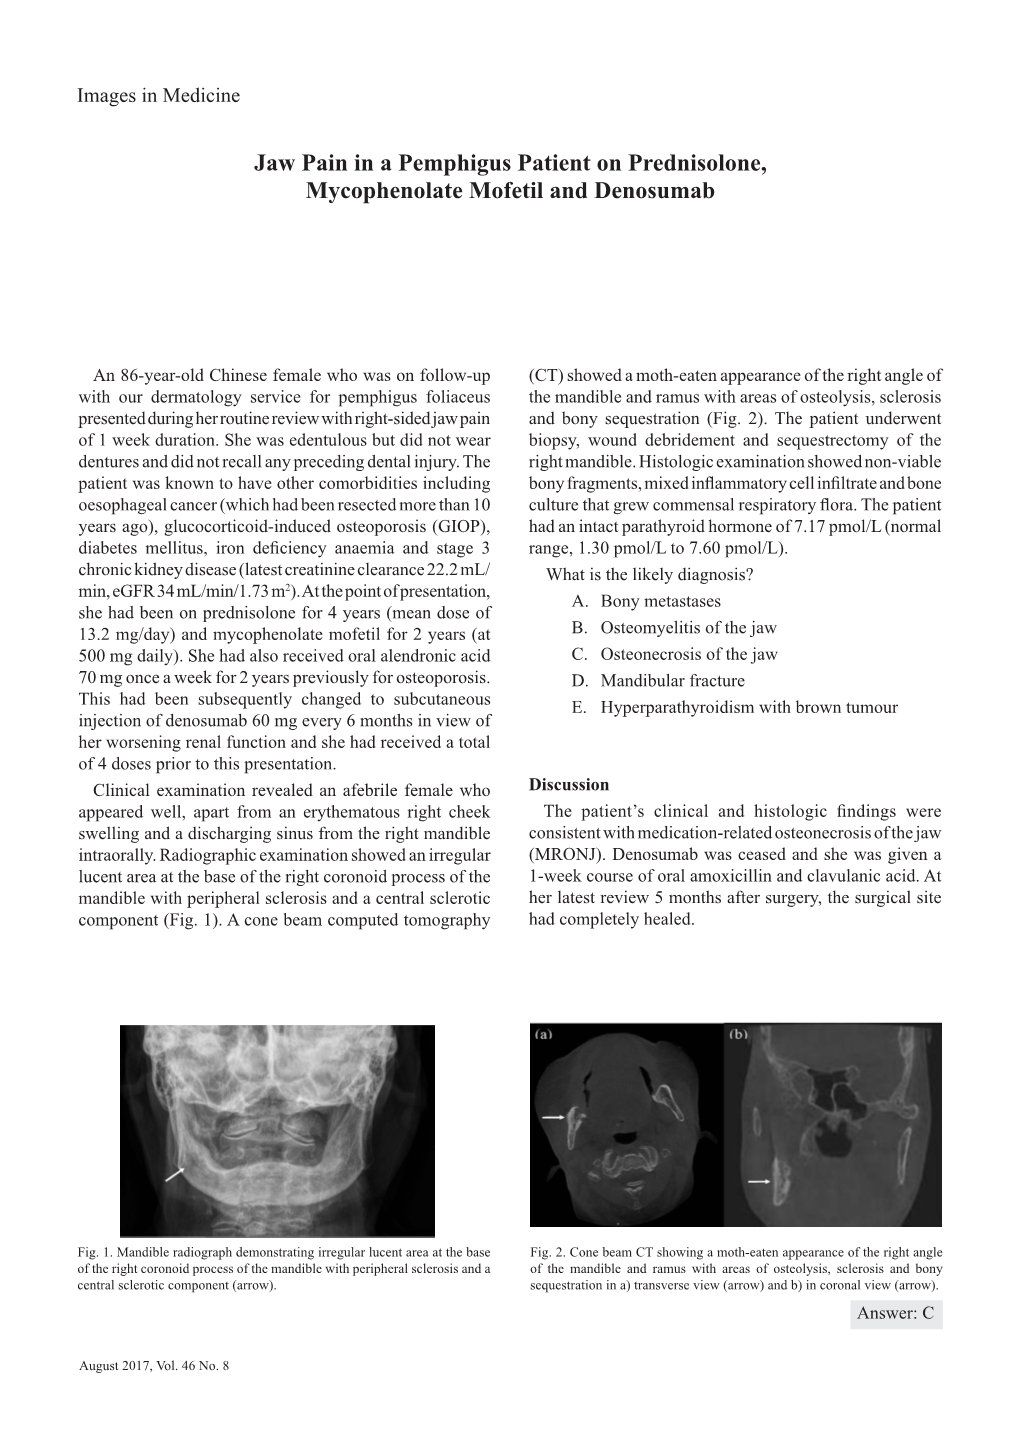 Jaw Pain in a Pemphigus Patient on Prednisolone, Mycophenolate Mofetil and Denosumab